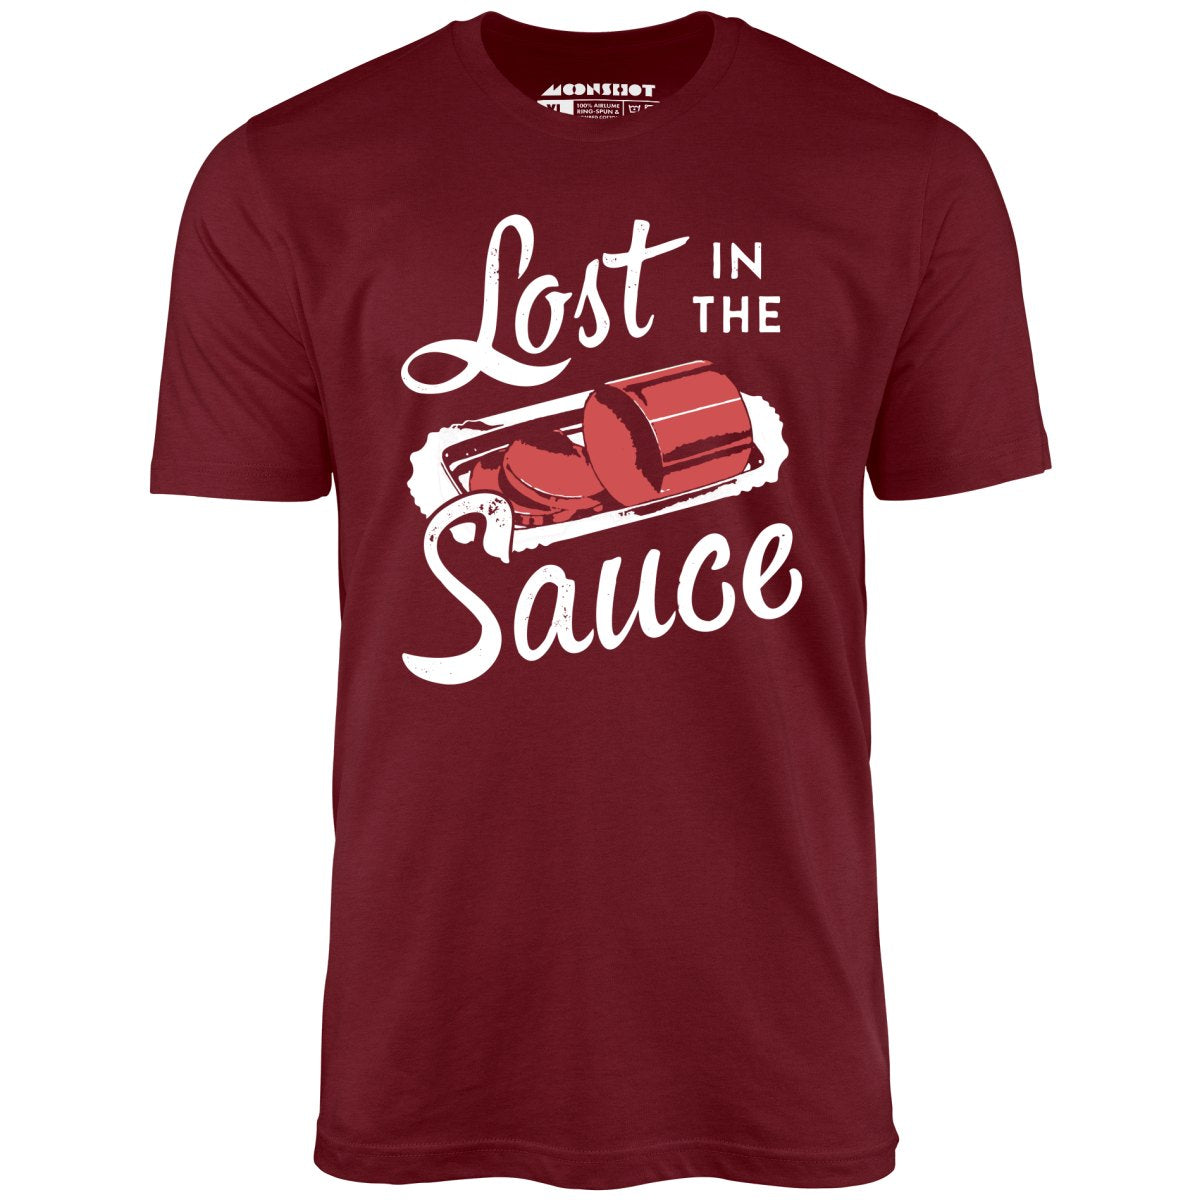 Lost in the Sauce - Unisex T-Shirt